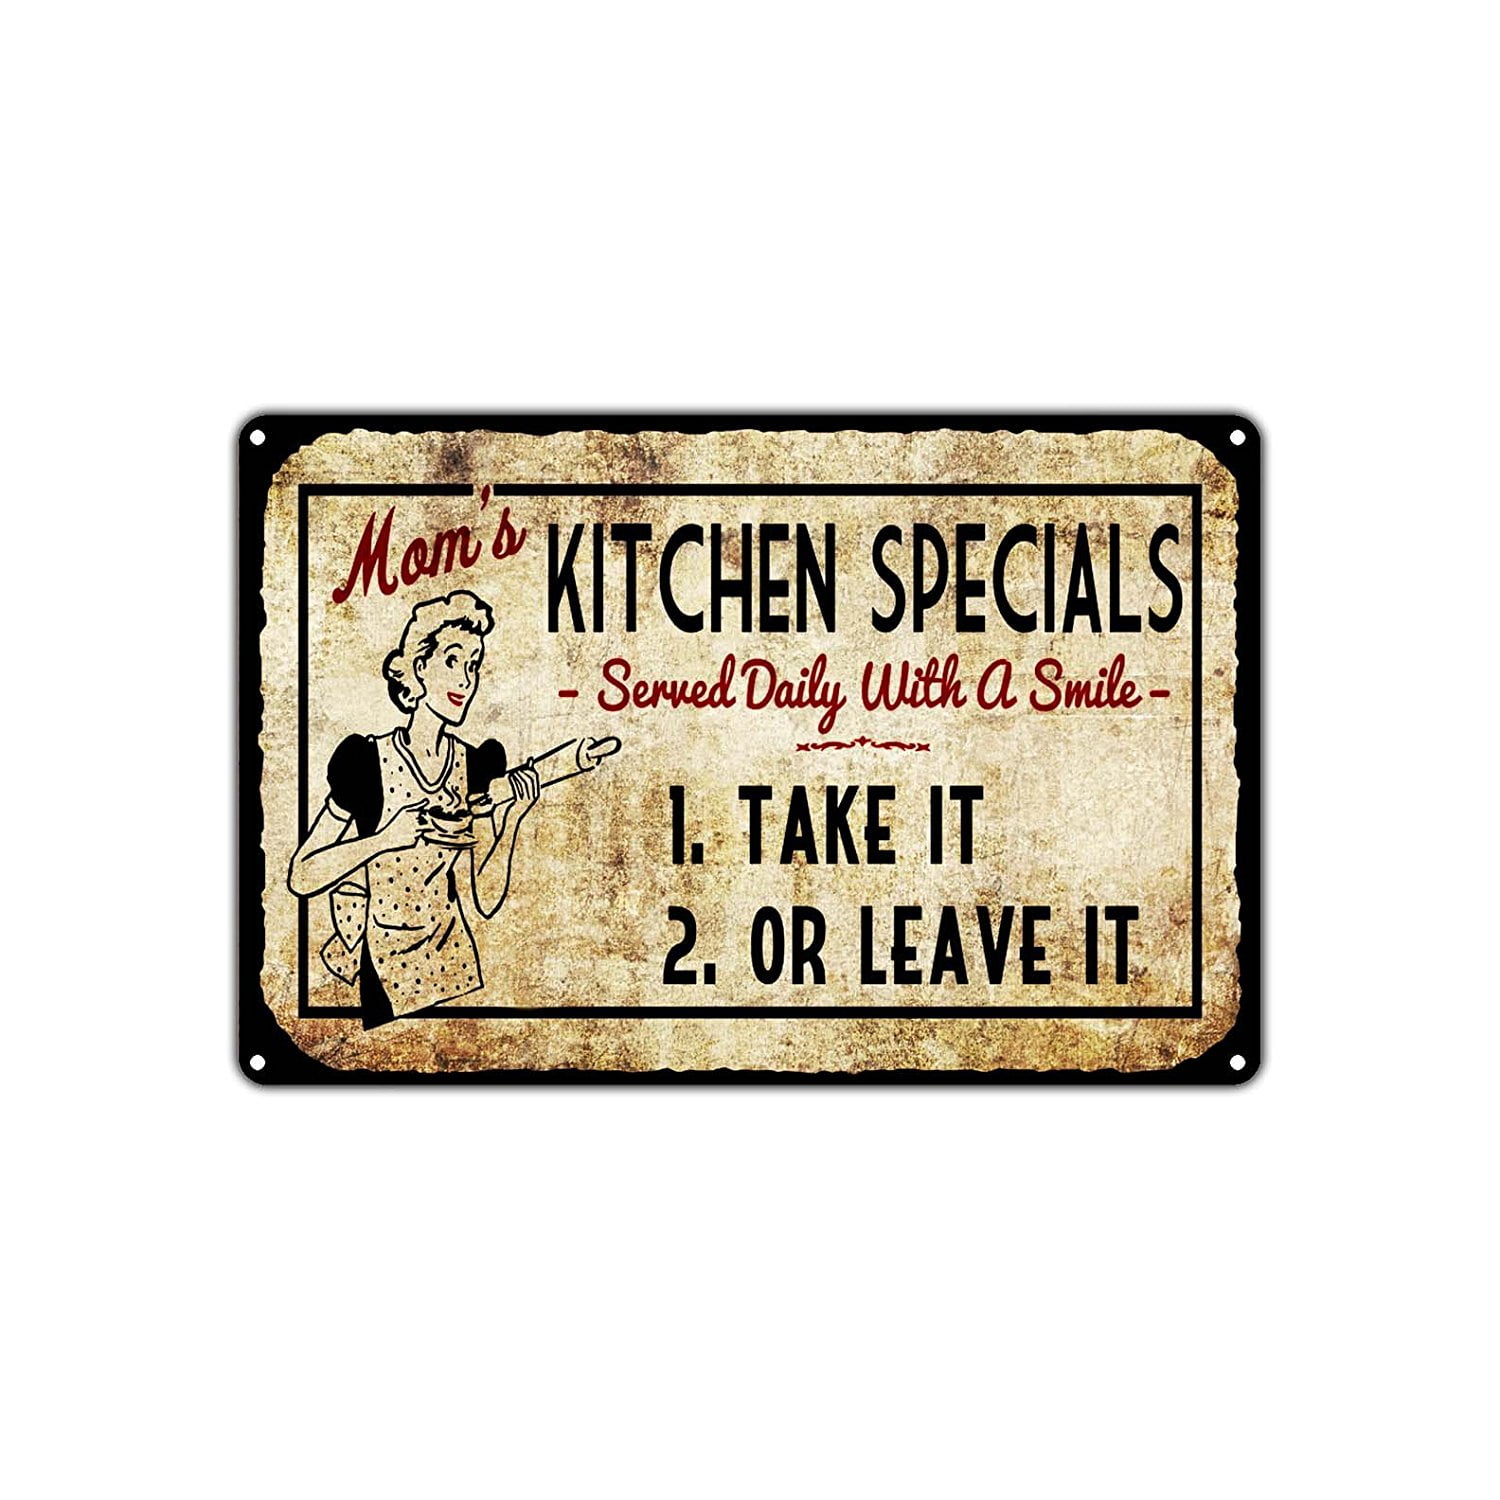 Cakes Retro Metal Signs/Plaques Man Cave Sweets Kitchen Novelty Gift 